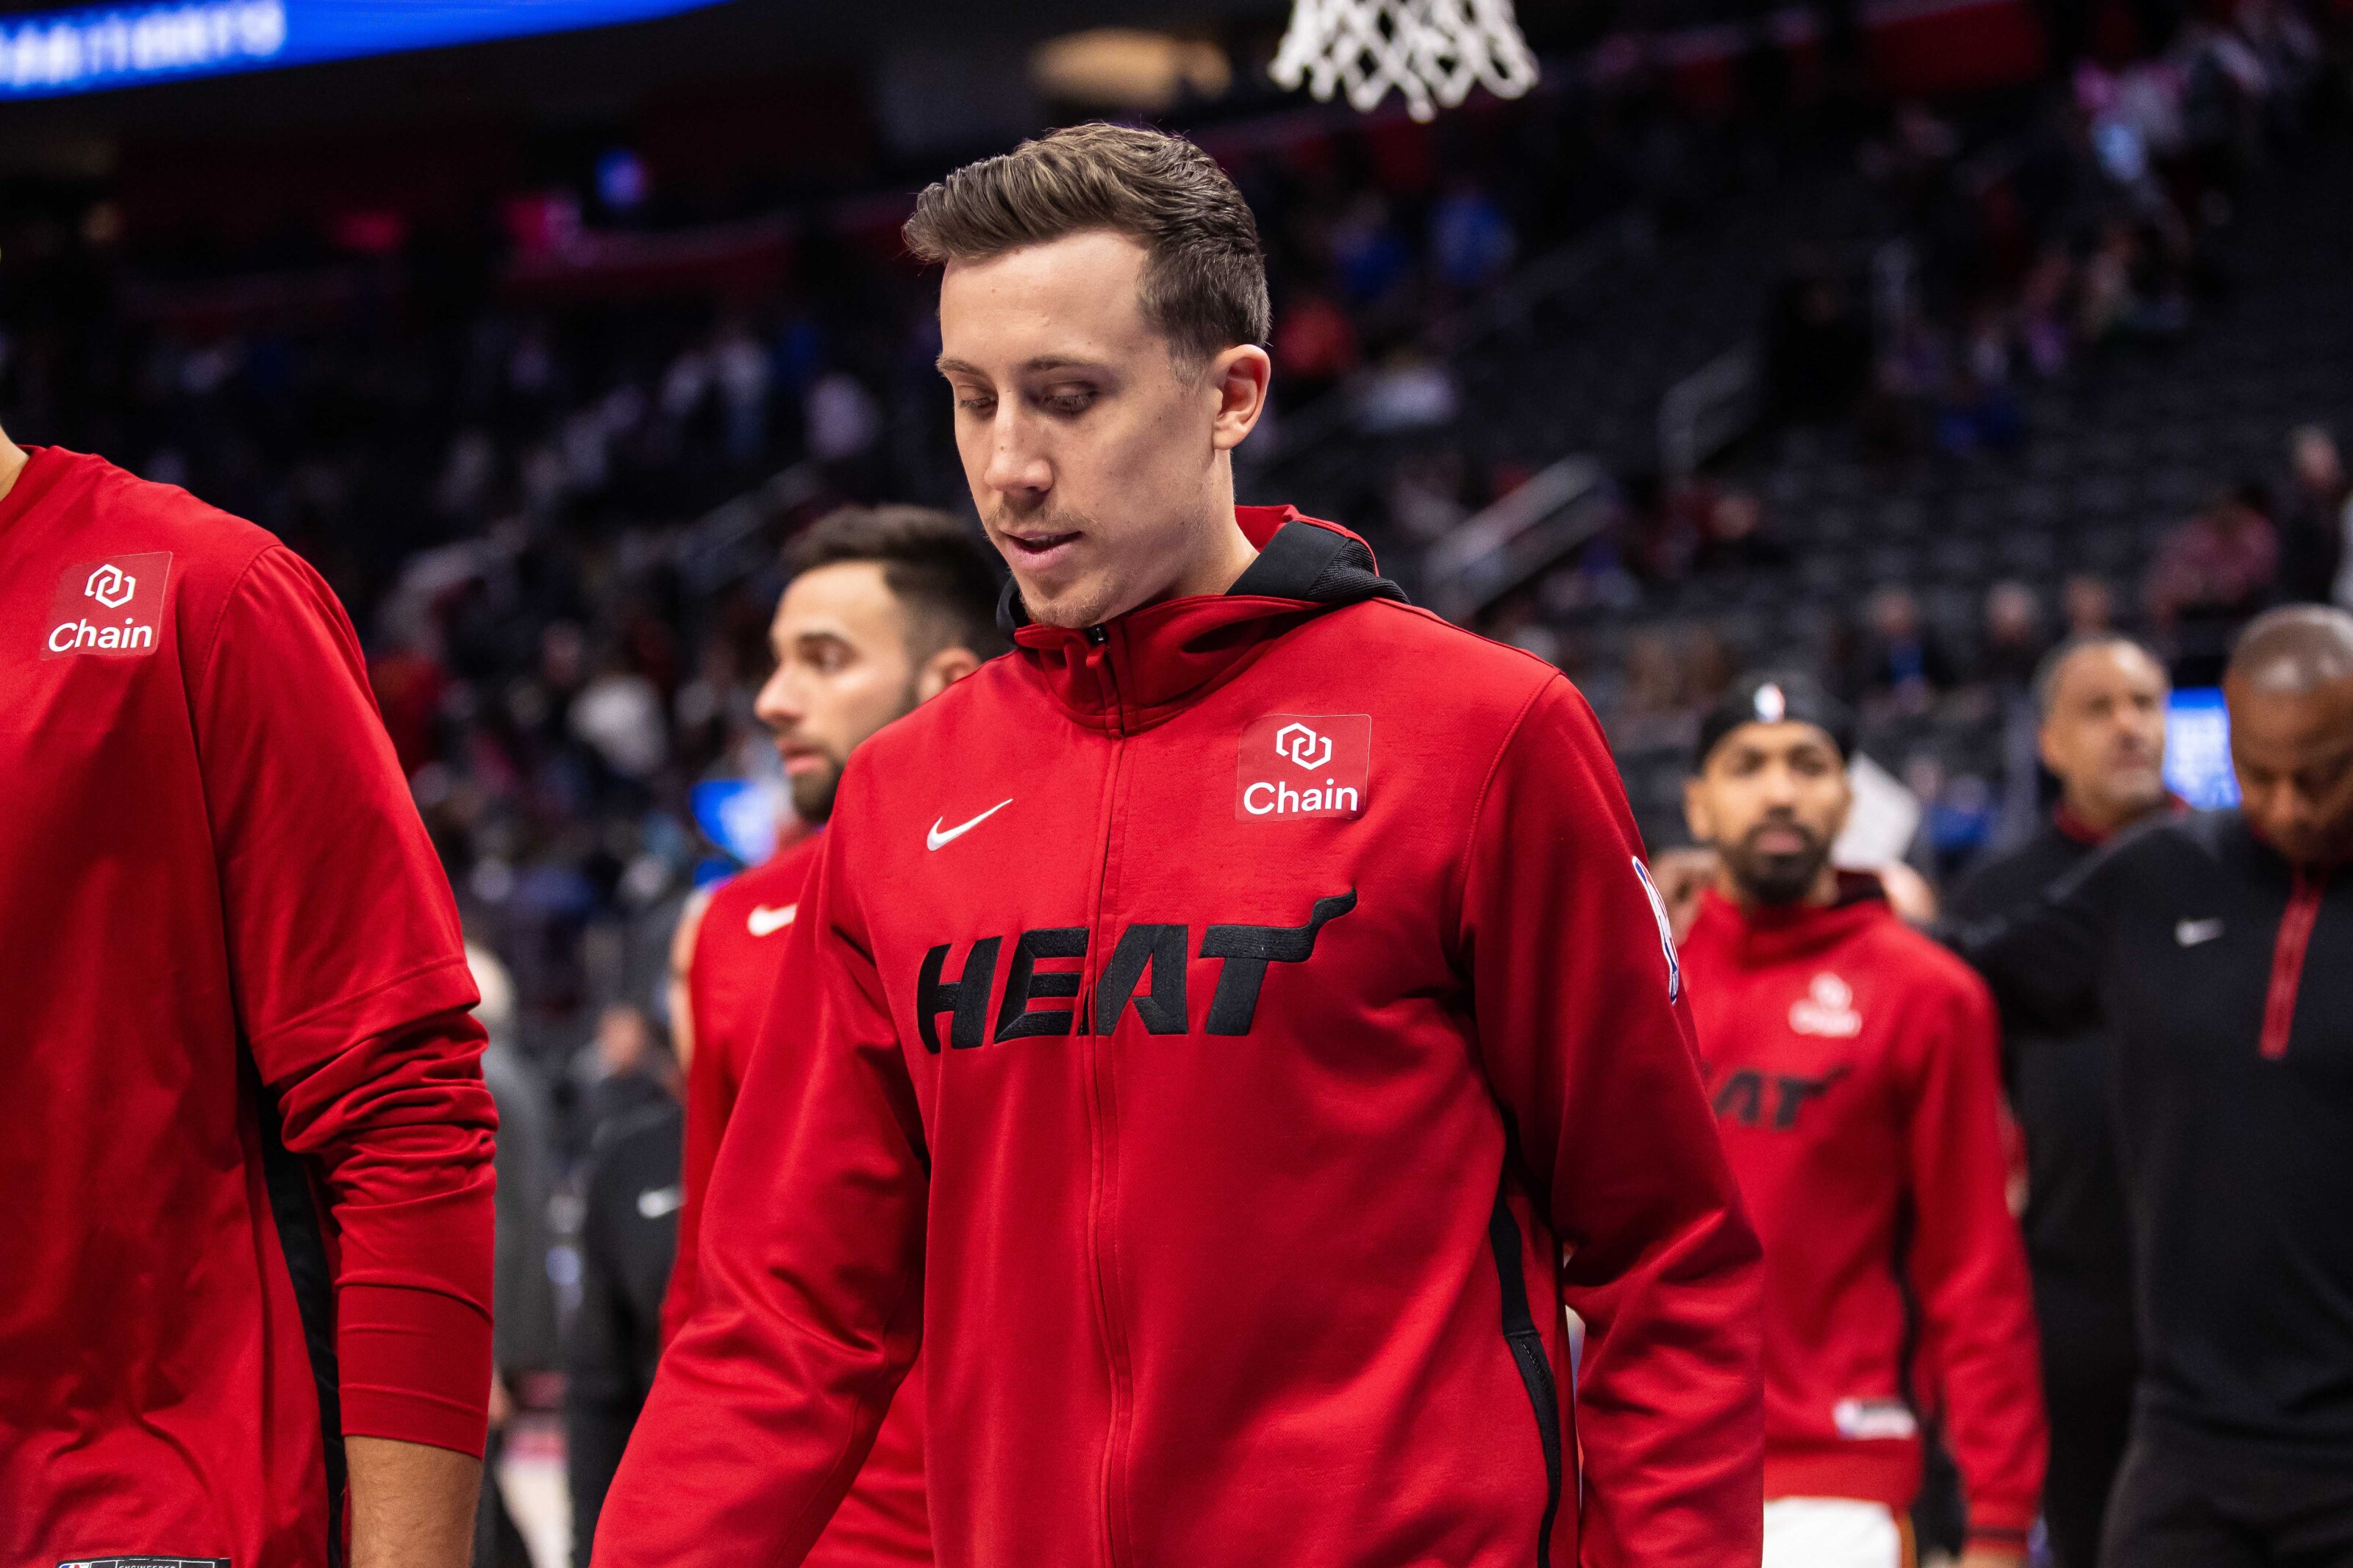 DUNCAN ROBINSON, WHATS YOUR OPINION ON HIM WITH THE TEAM AND FREE